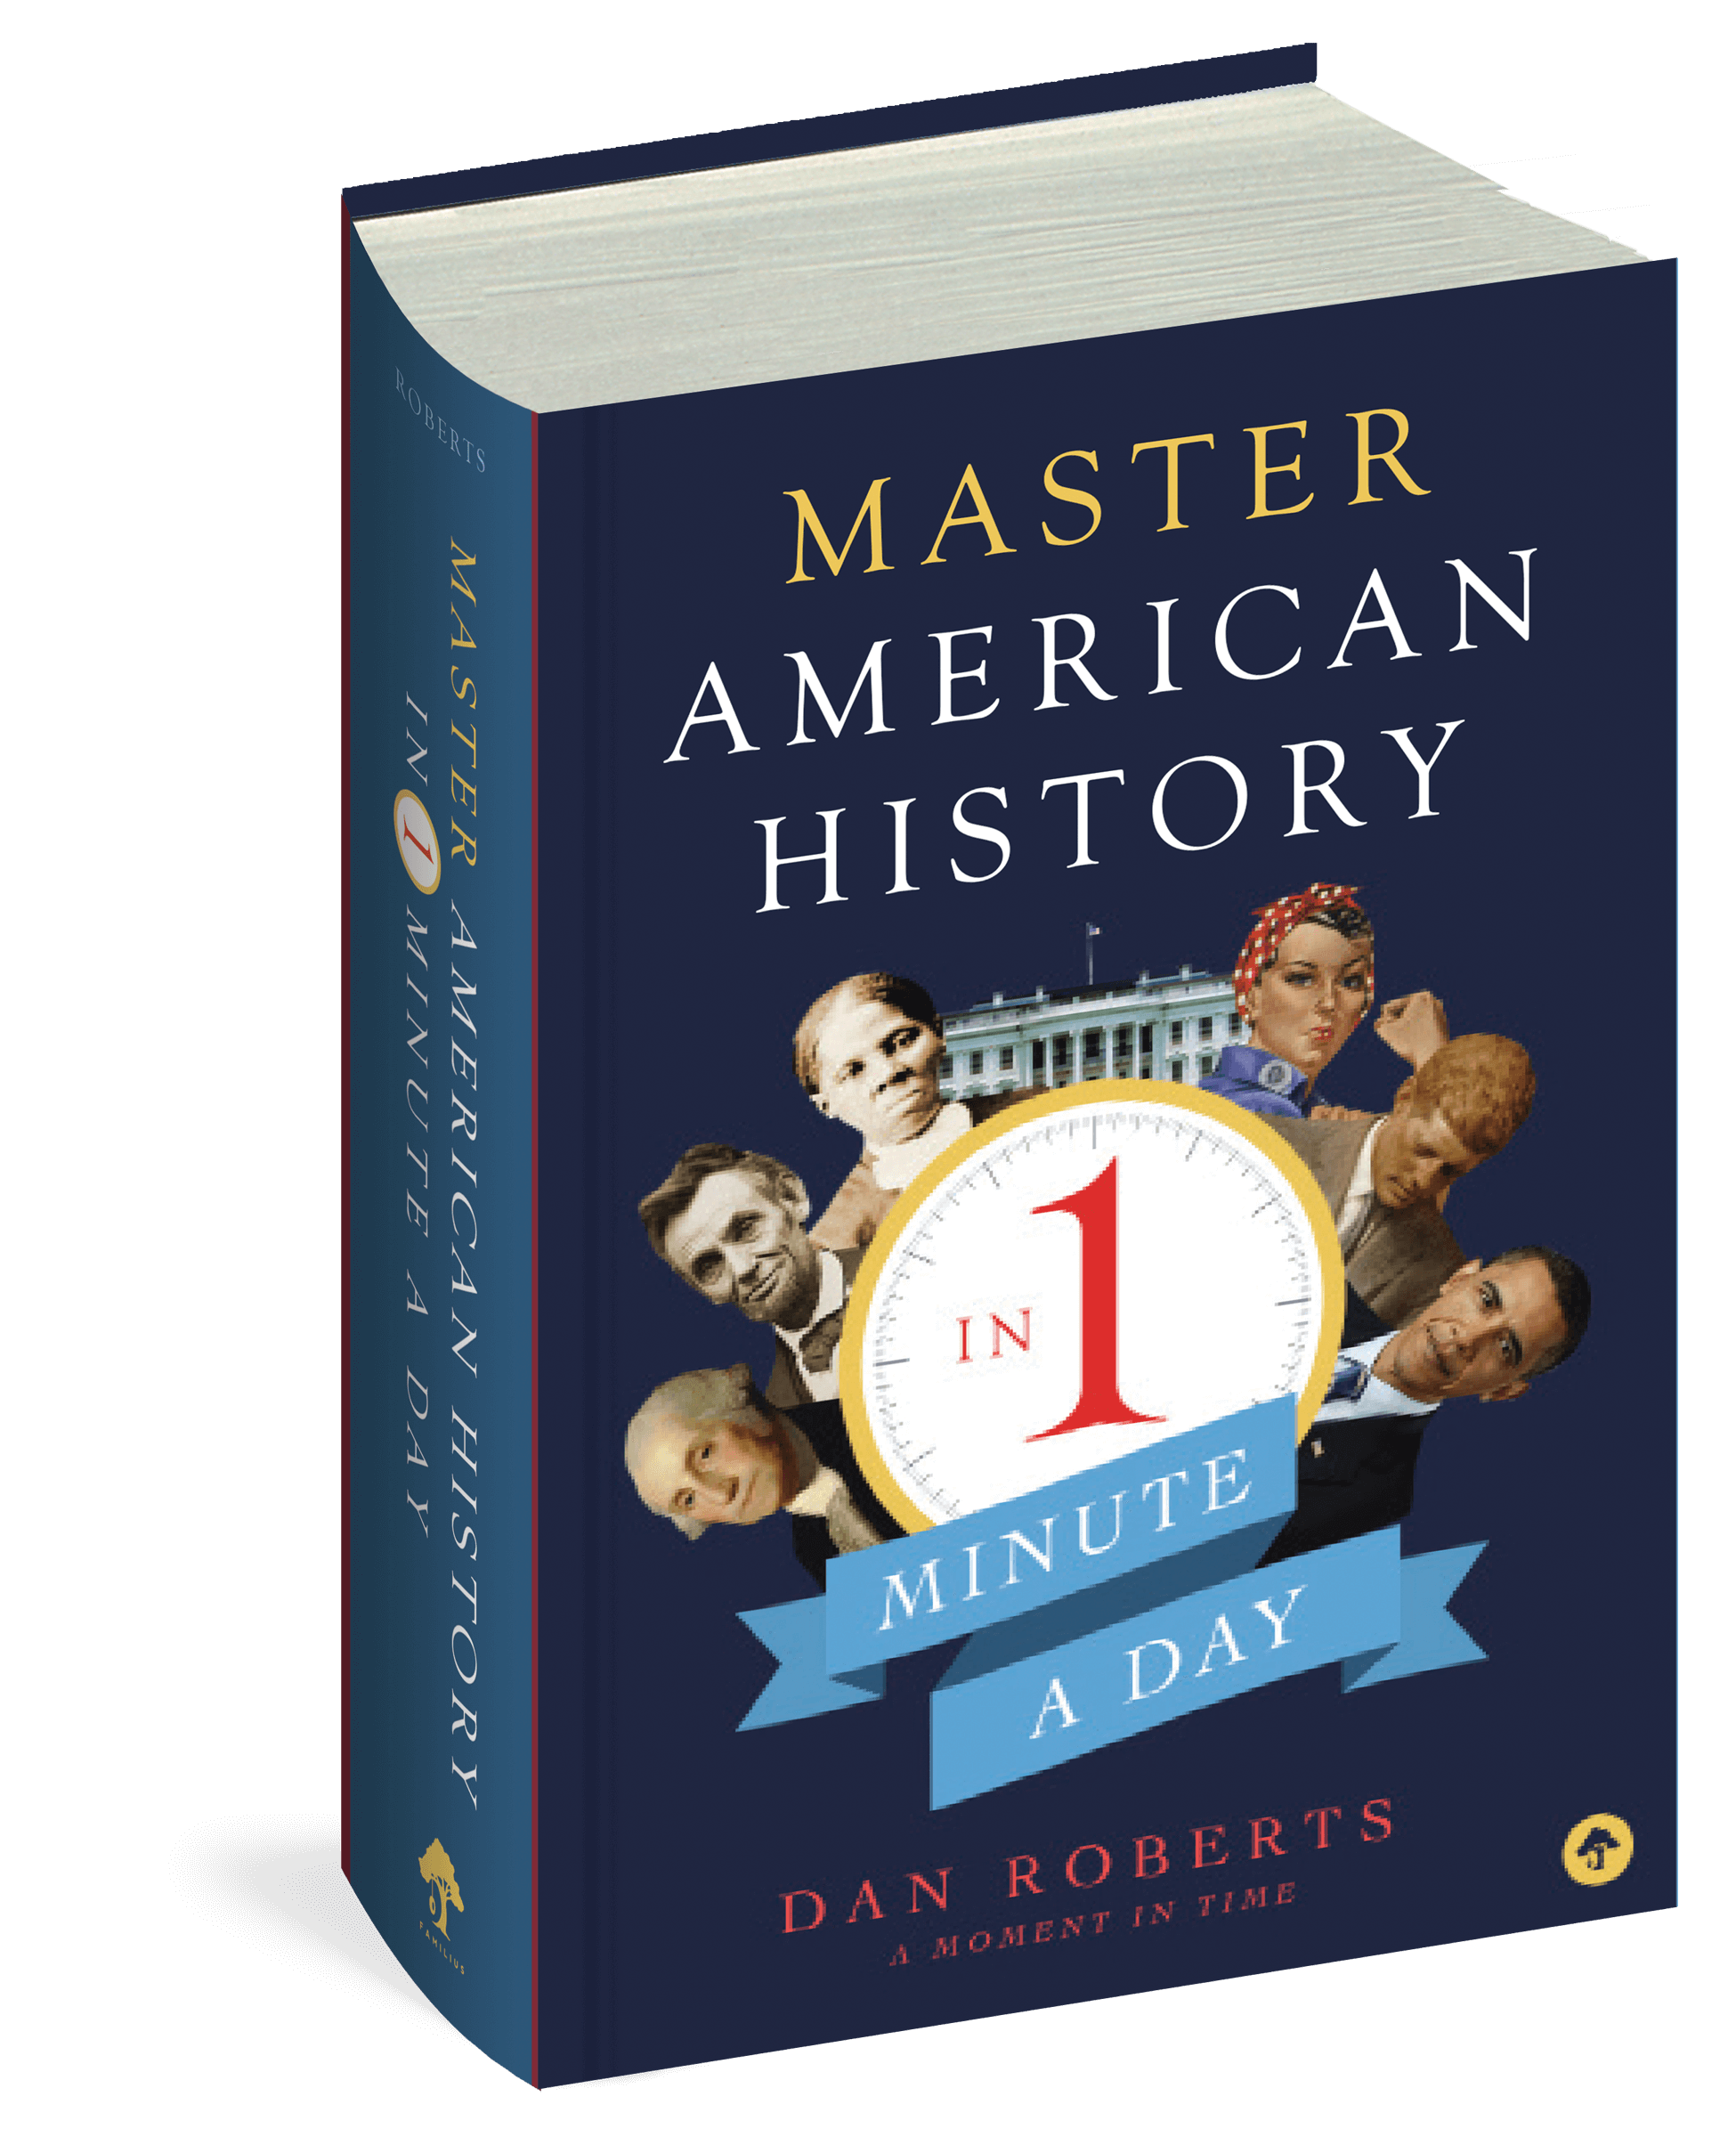 The cover of the book Master American History in 1 Minute a Day.